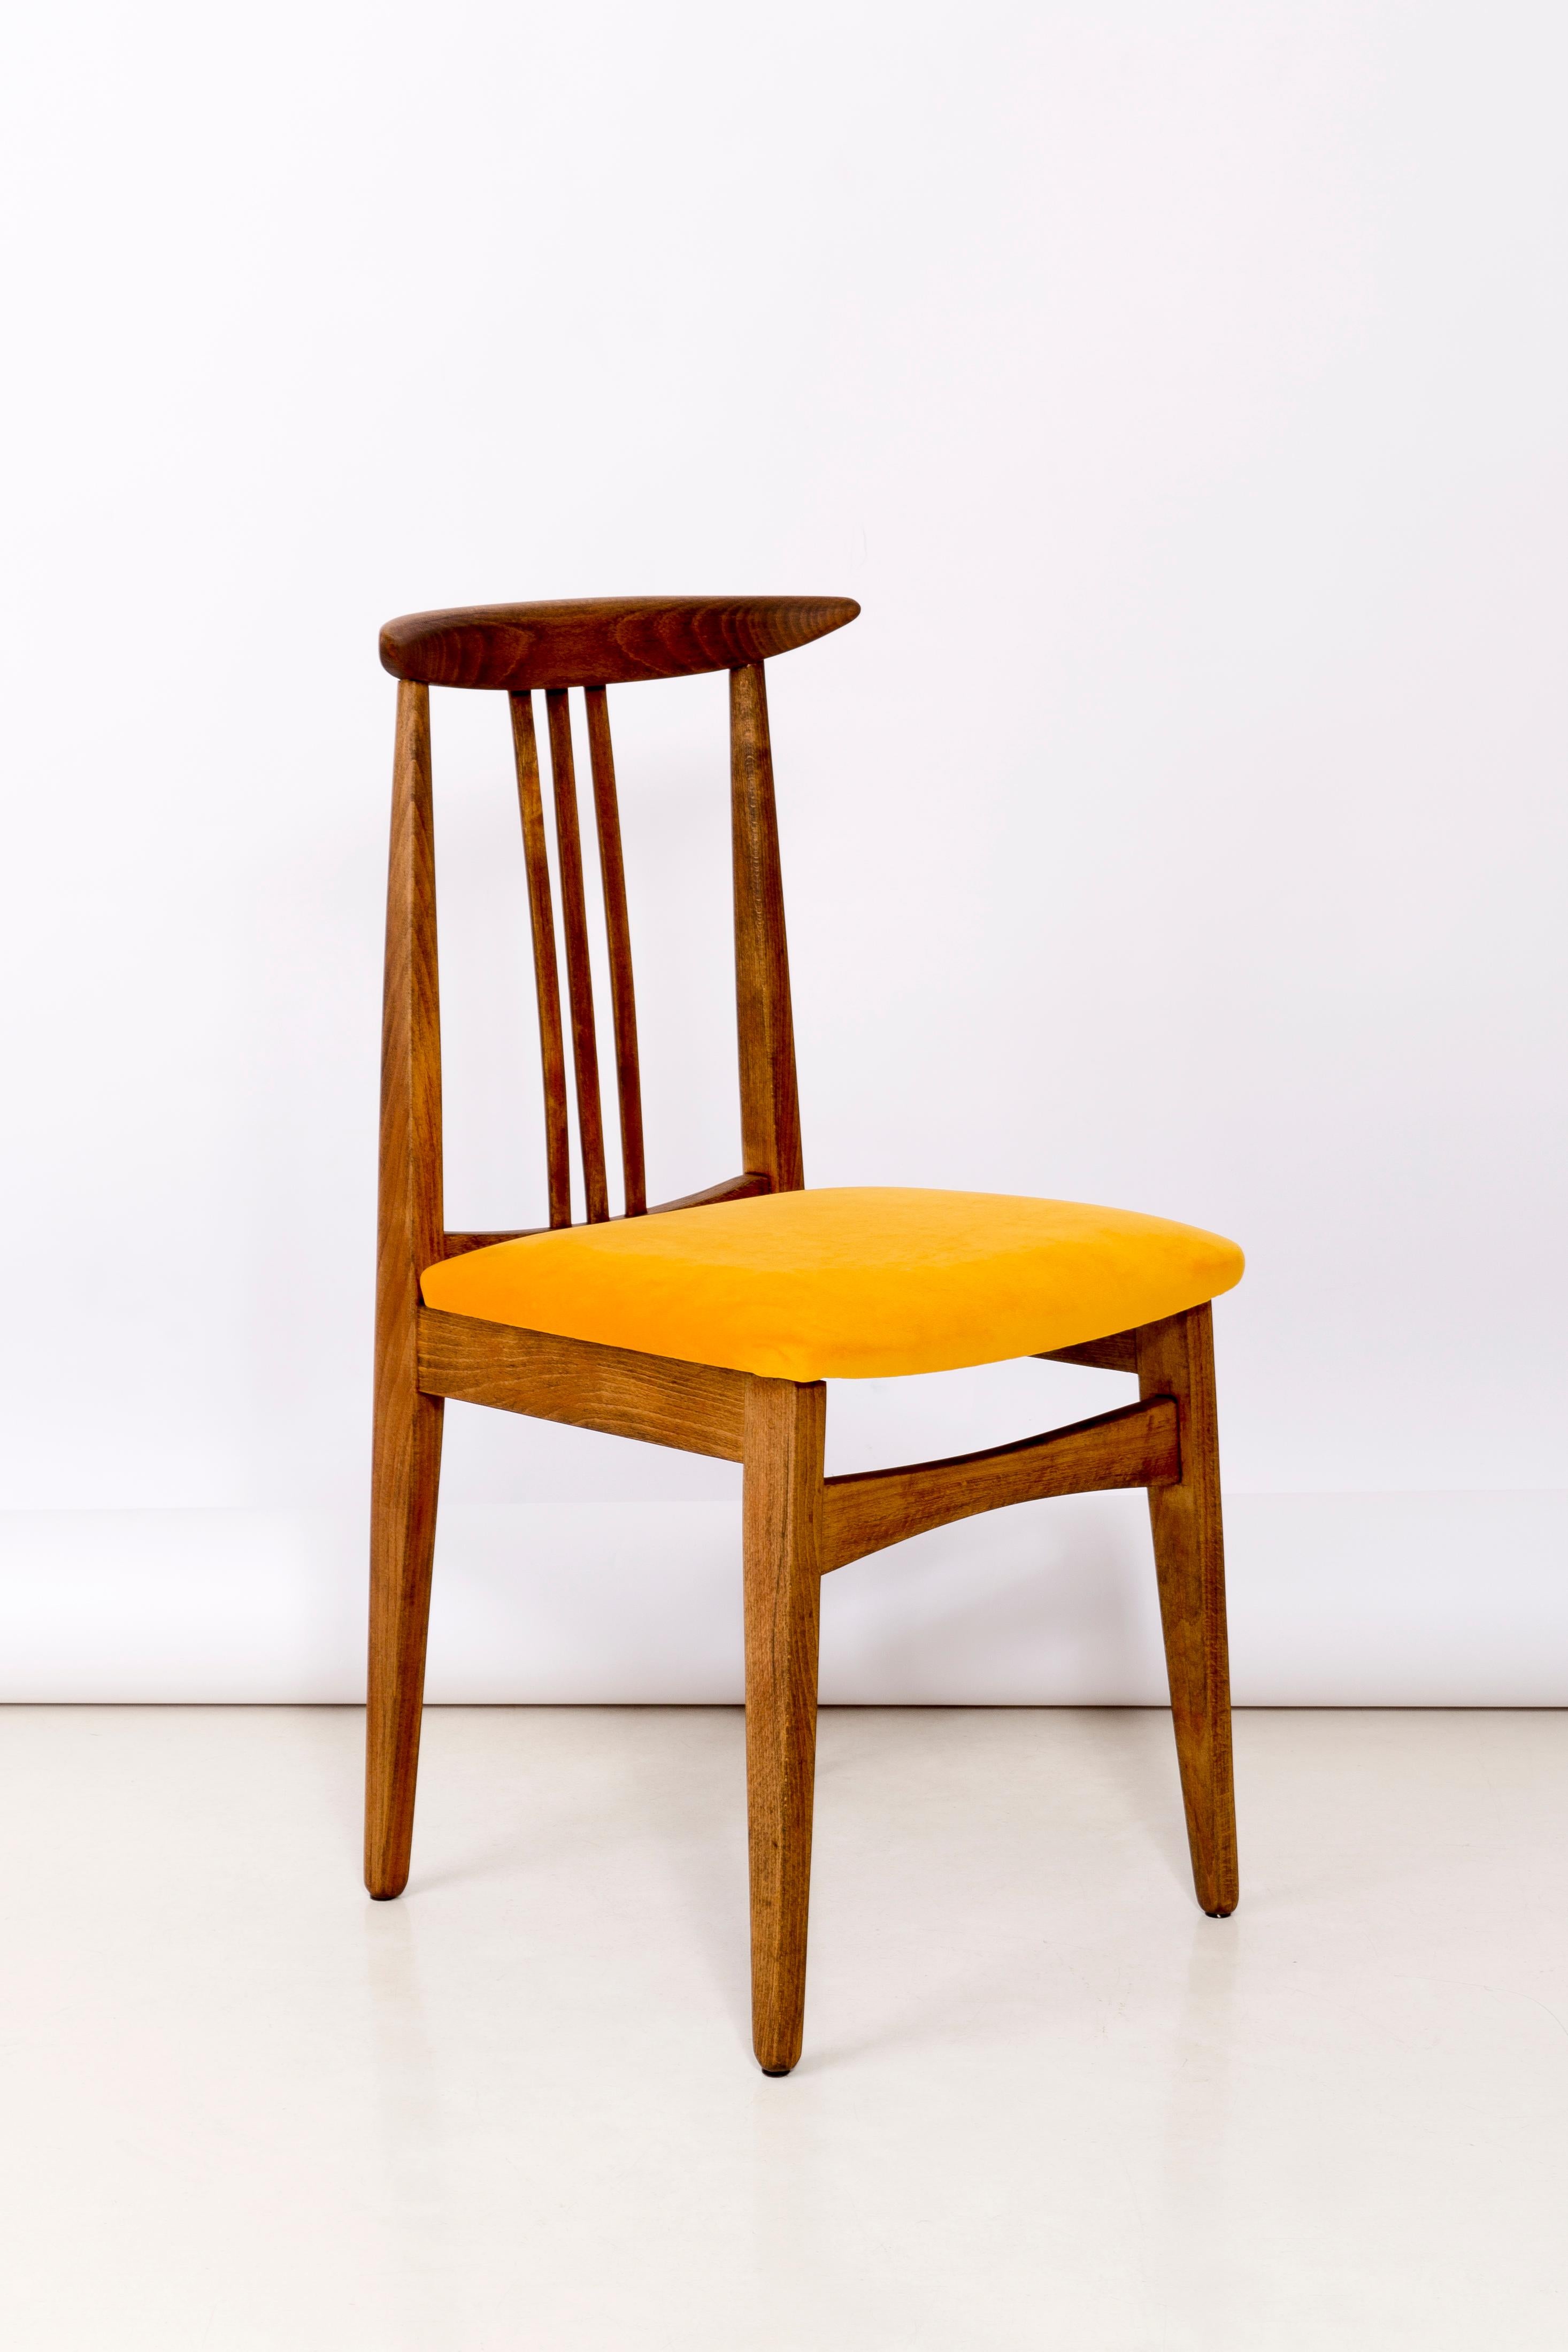 Hand-Crafted Set of Four Yellow Chairs, by Zielinski, Poland, 1960s For Sale